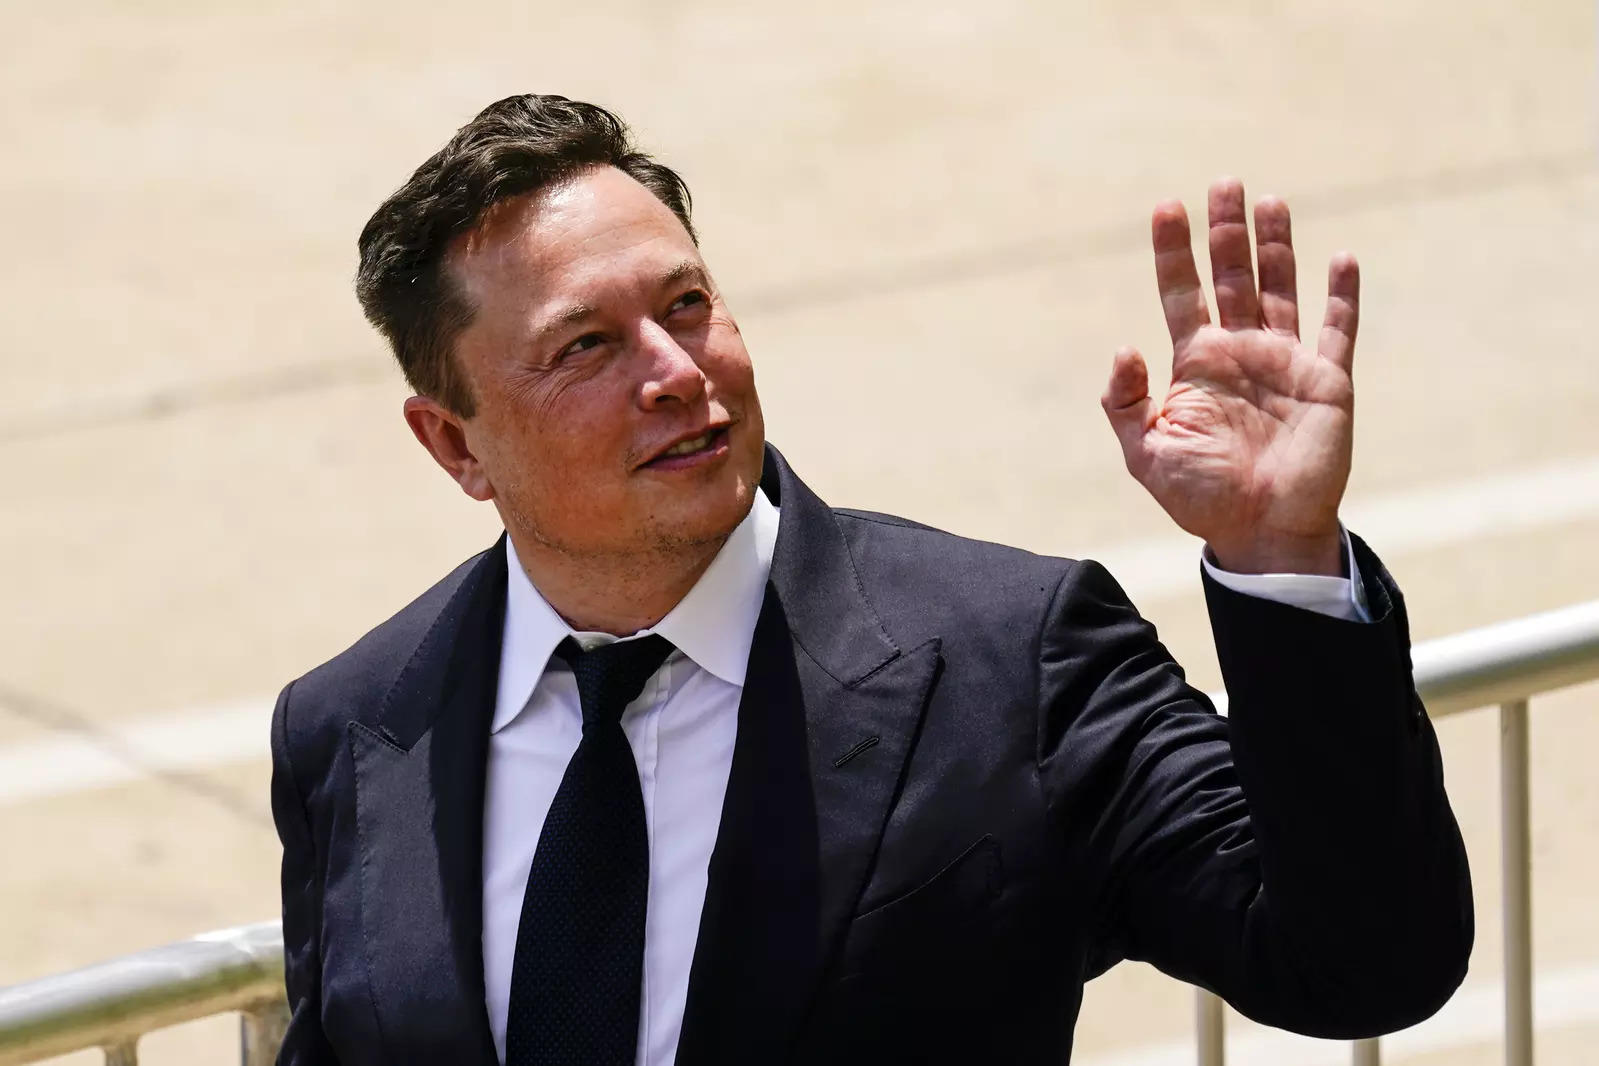 Musk's 'AI Day' confronts tough questions about Tesla's technology